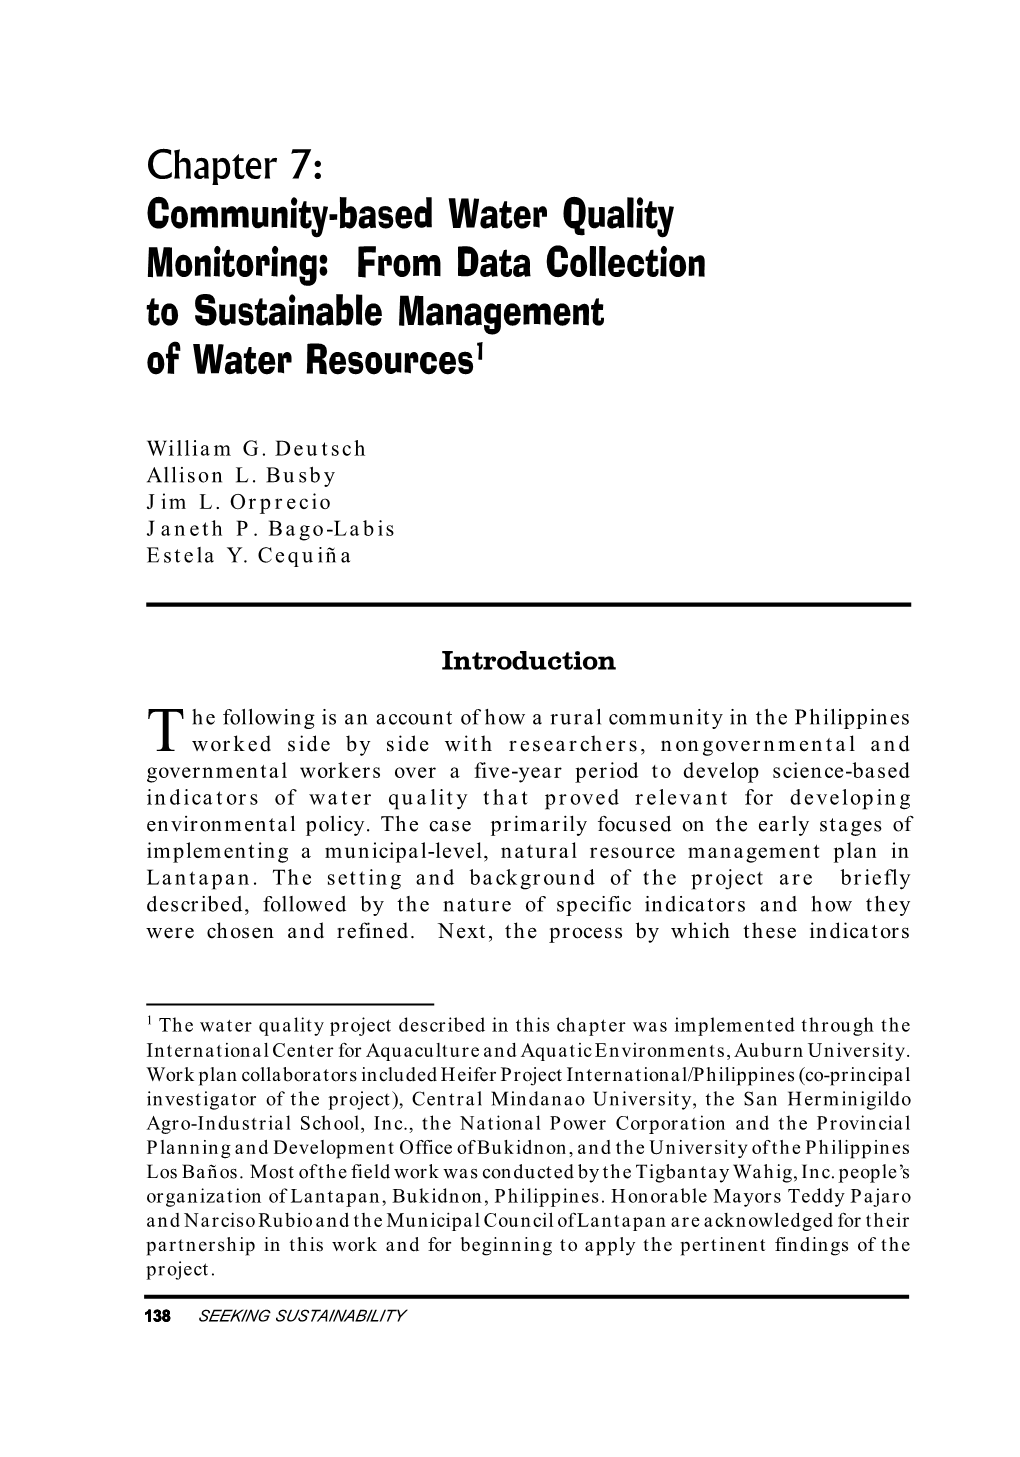 Chapter 7: Community-Based Water Quality Monitoring: from Data Collection to Sustainable Management of Water Resources1